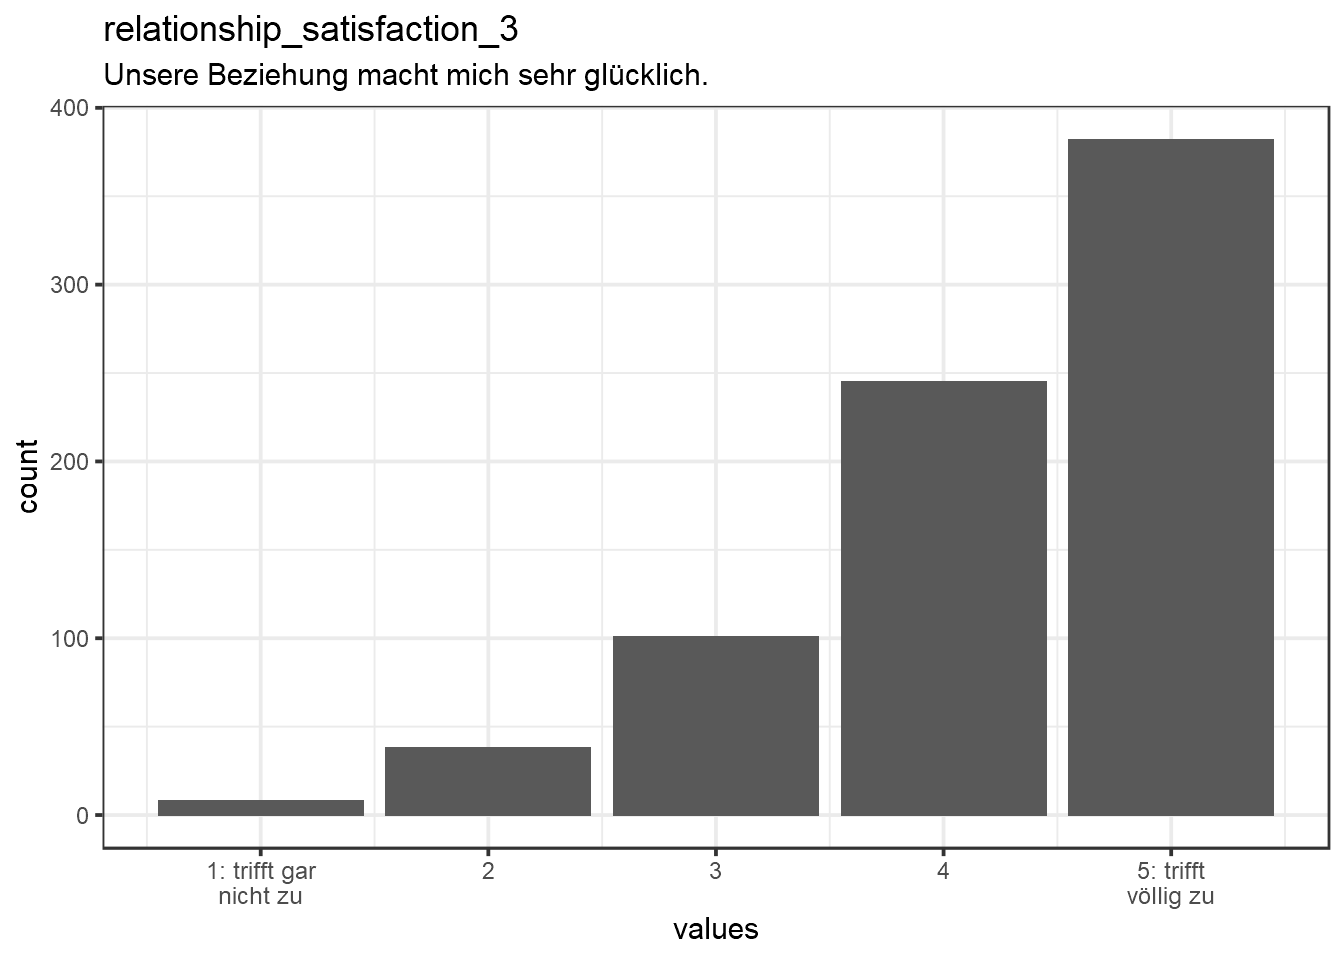 Distribution of values for relationship_satisfaction_3